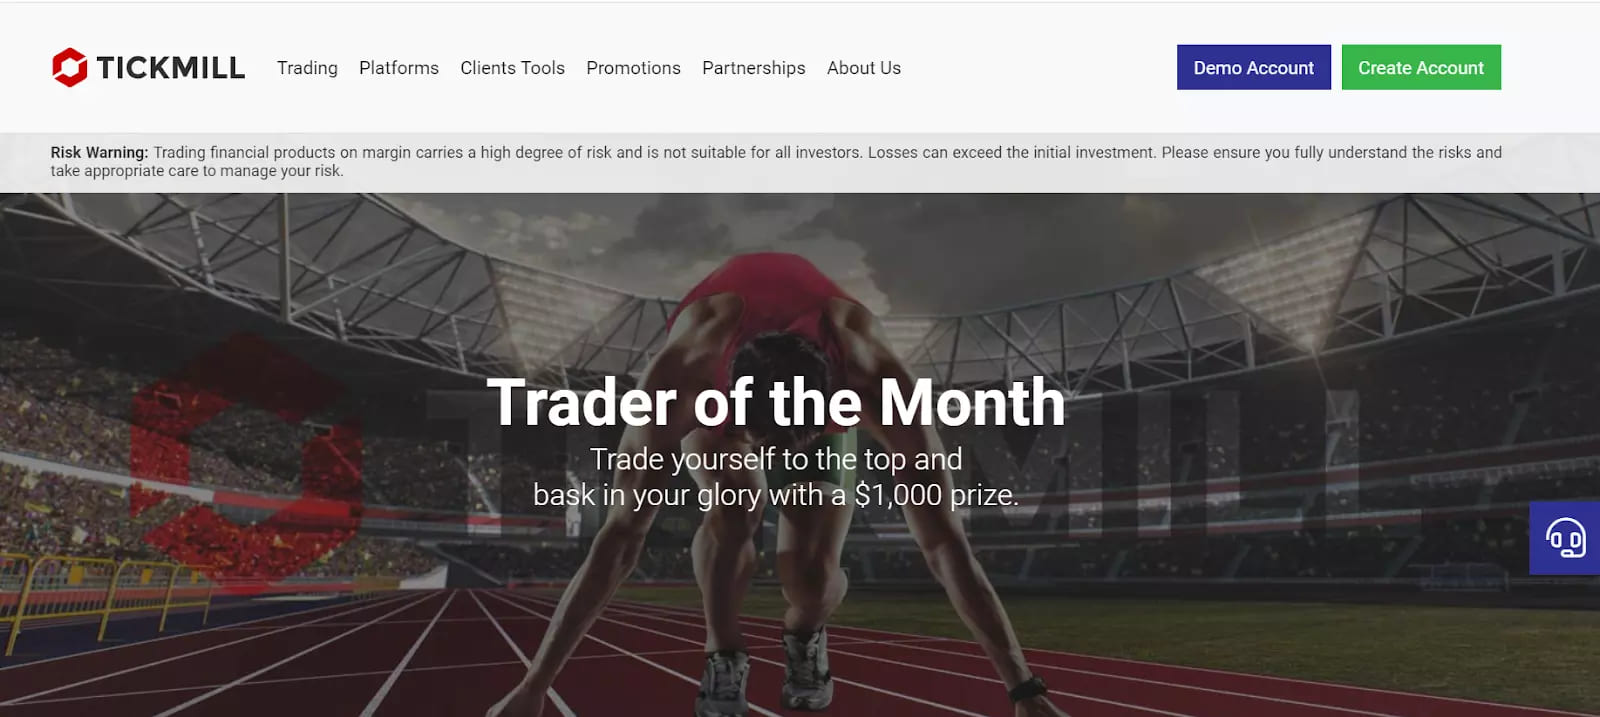 Tickmill Review - Trader of the Month